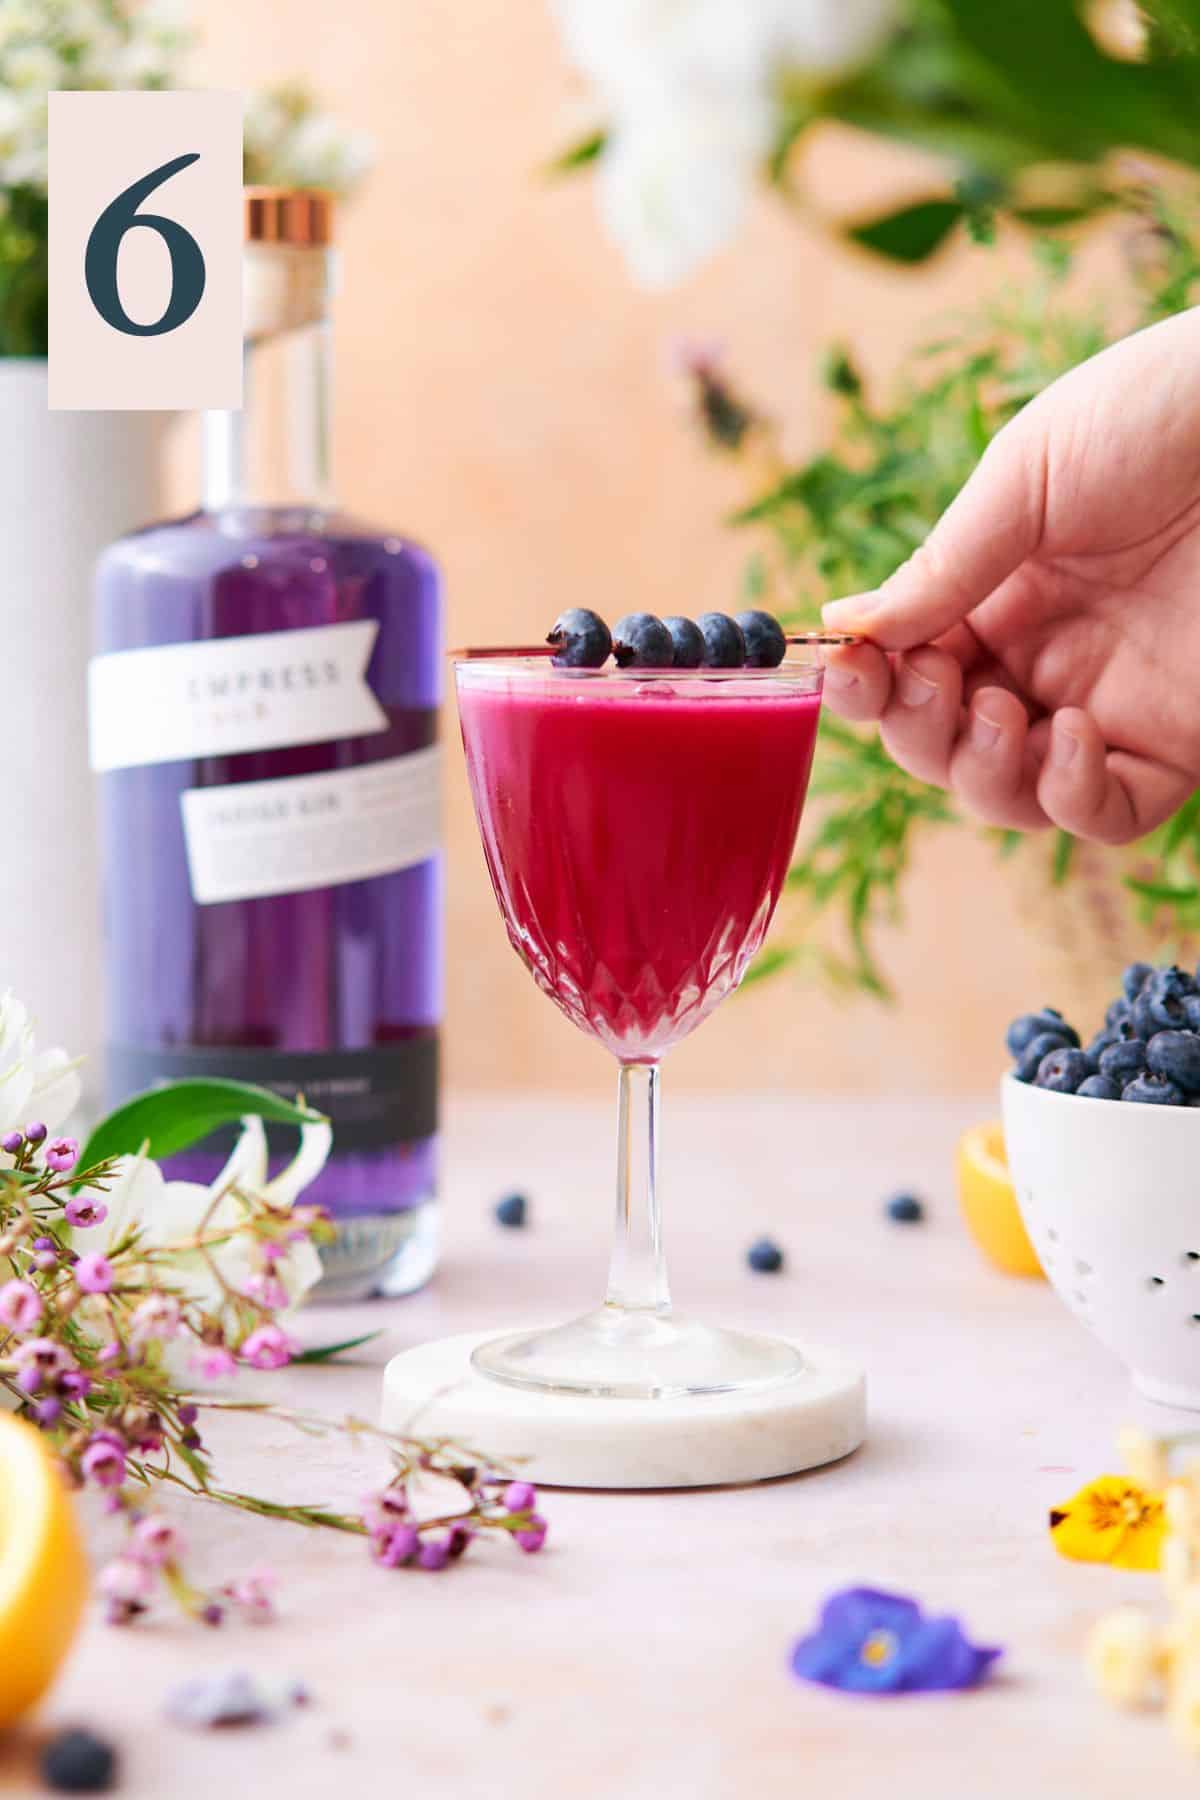 hand placing blueberries on a cocktail pic on top of a small cocktail, surrounded by Empress and other ingredients.